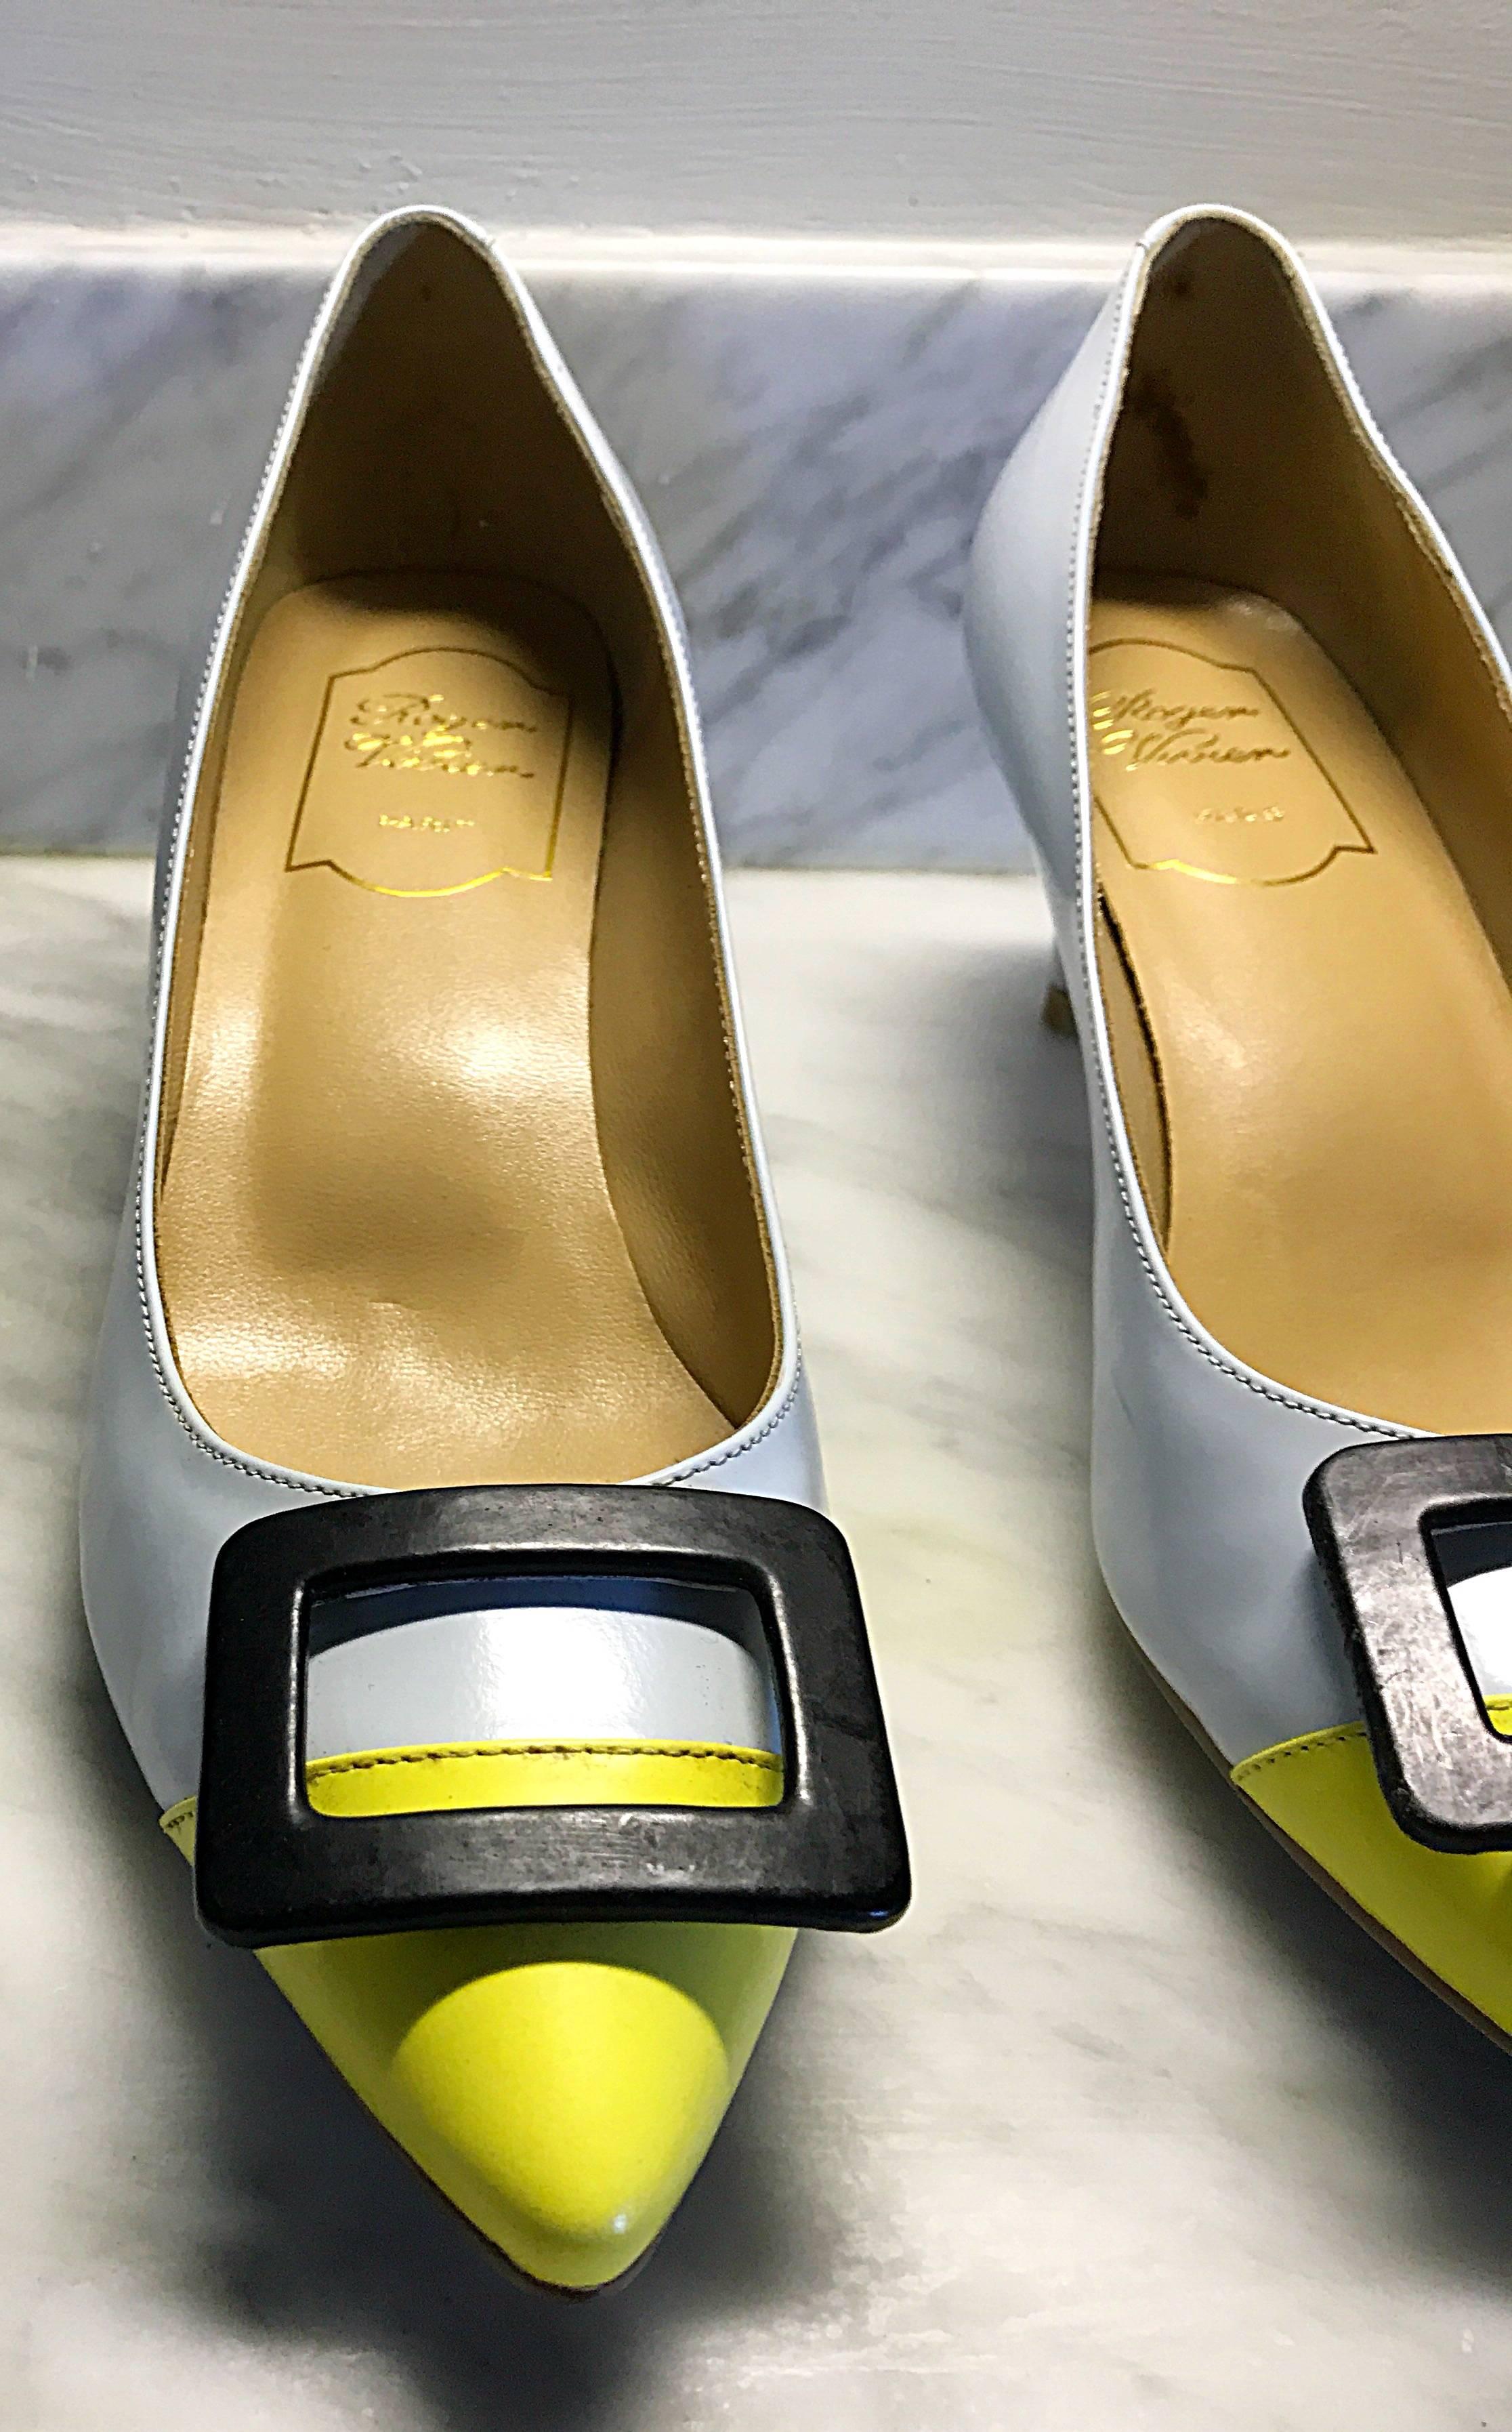 Chic and classic ROGER VIVIER baby blue and yellow color lock leather heels! Features a sensible and comfortable low heel, that is just shy of a kitten heel. Signature Vivier oversized black buckle at toe. Leather sole with rubber support. Can